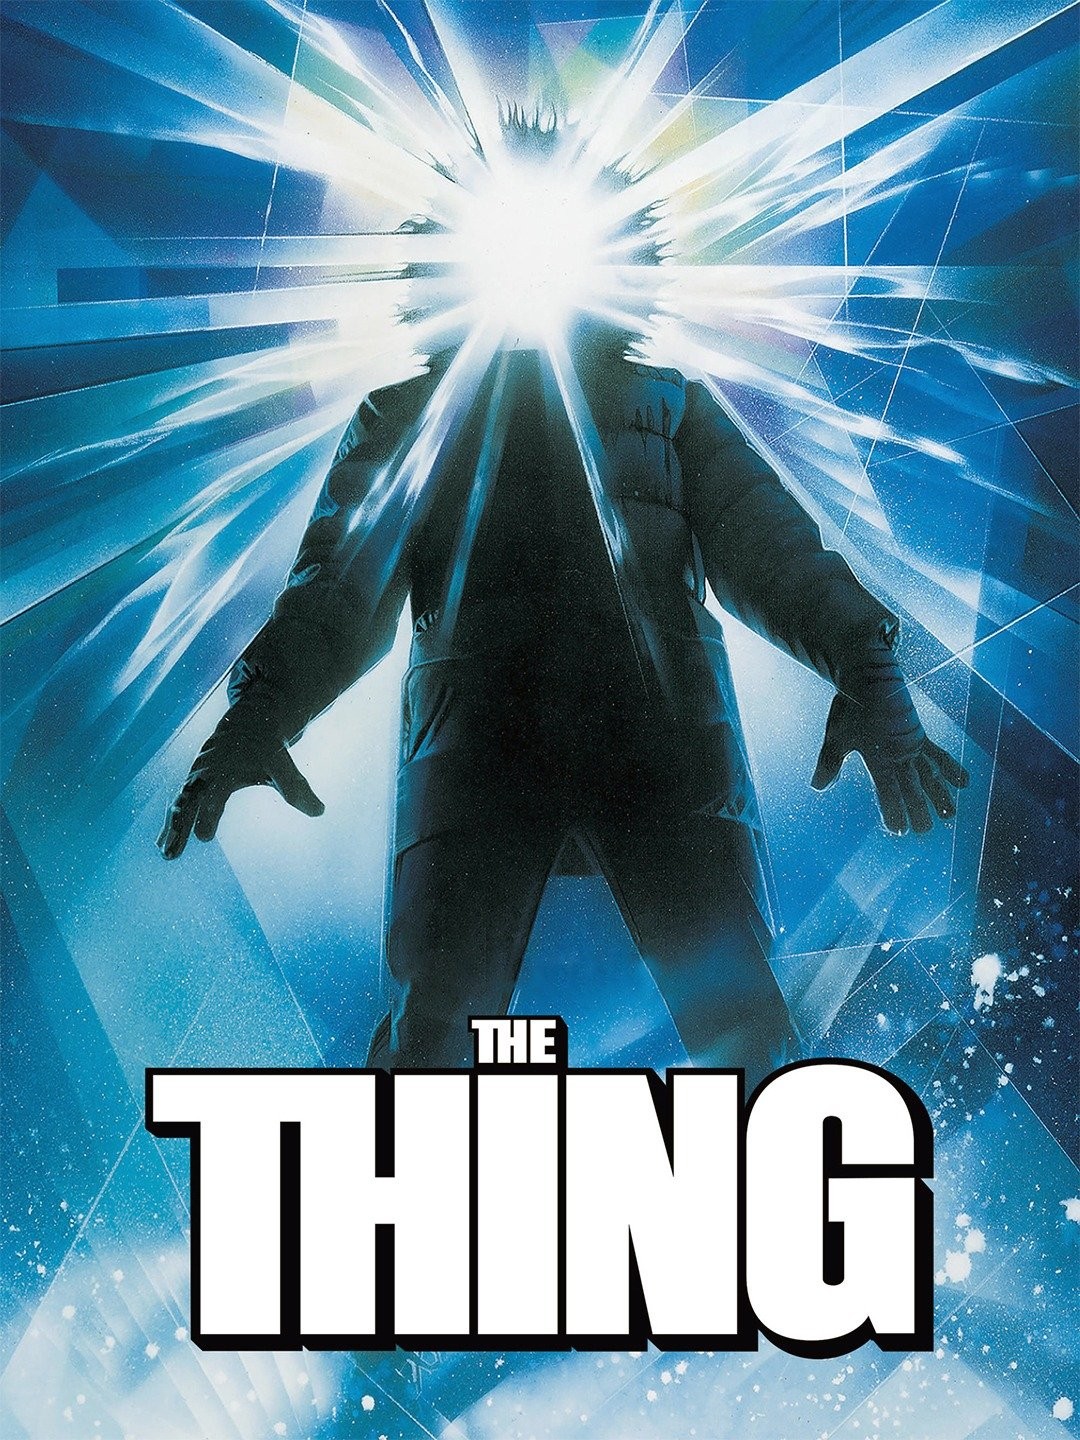 The Thing - Bande-annonce de 1982 # 2 (VOSTFR) 